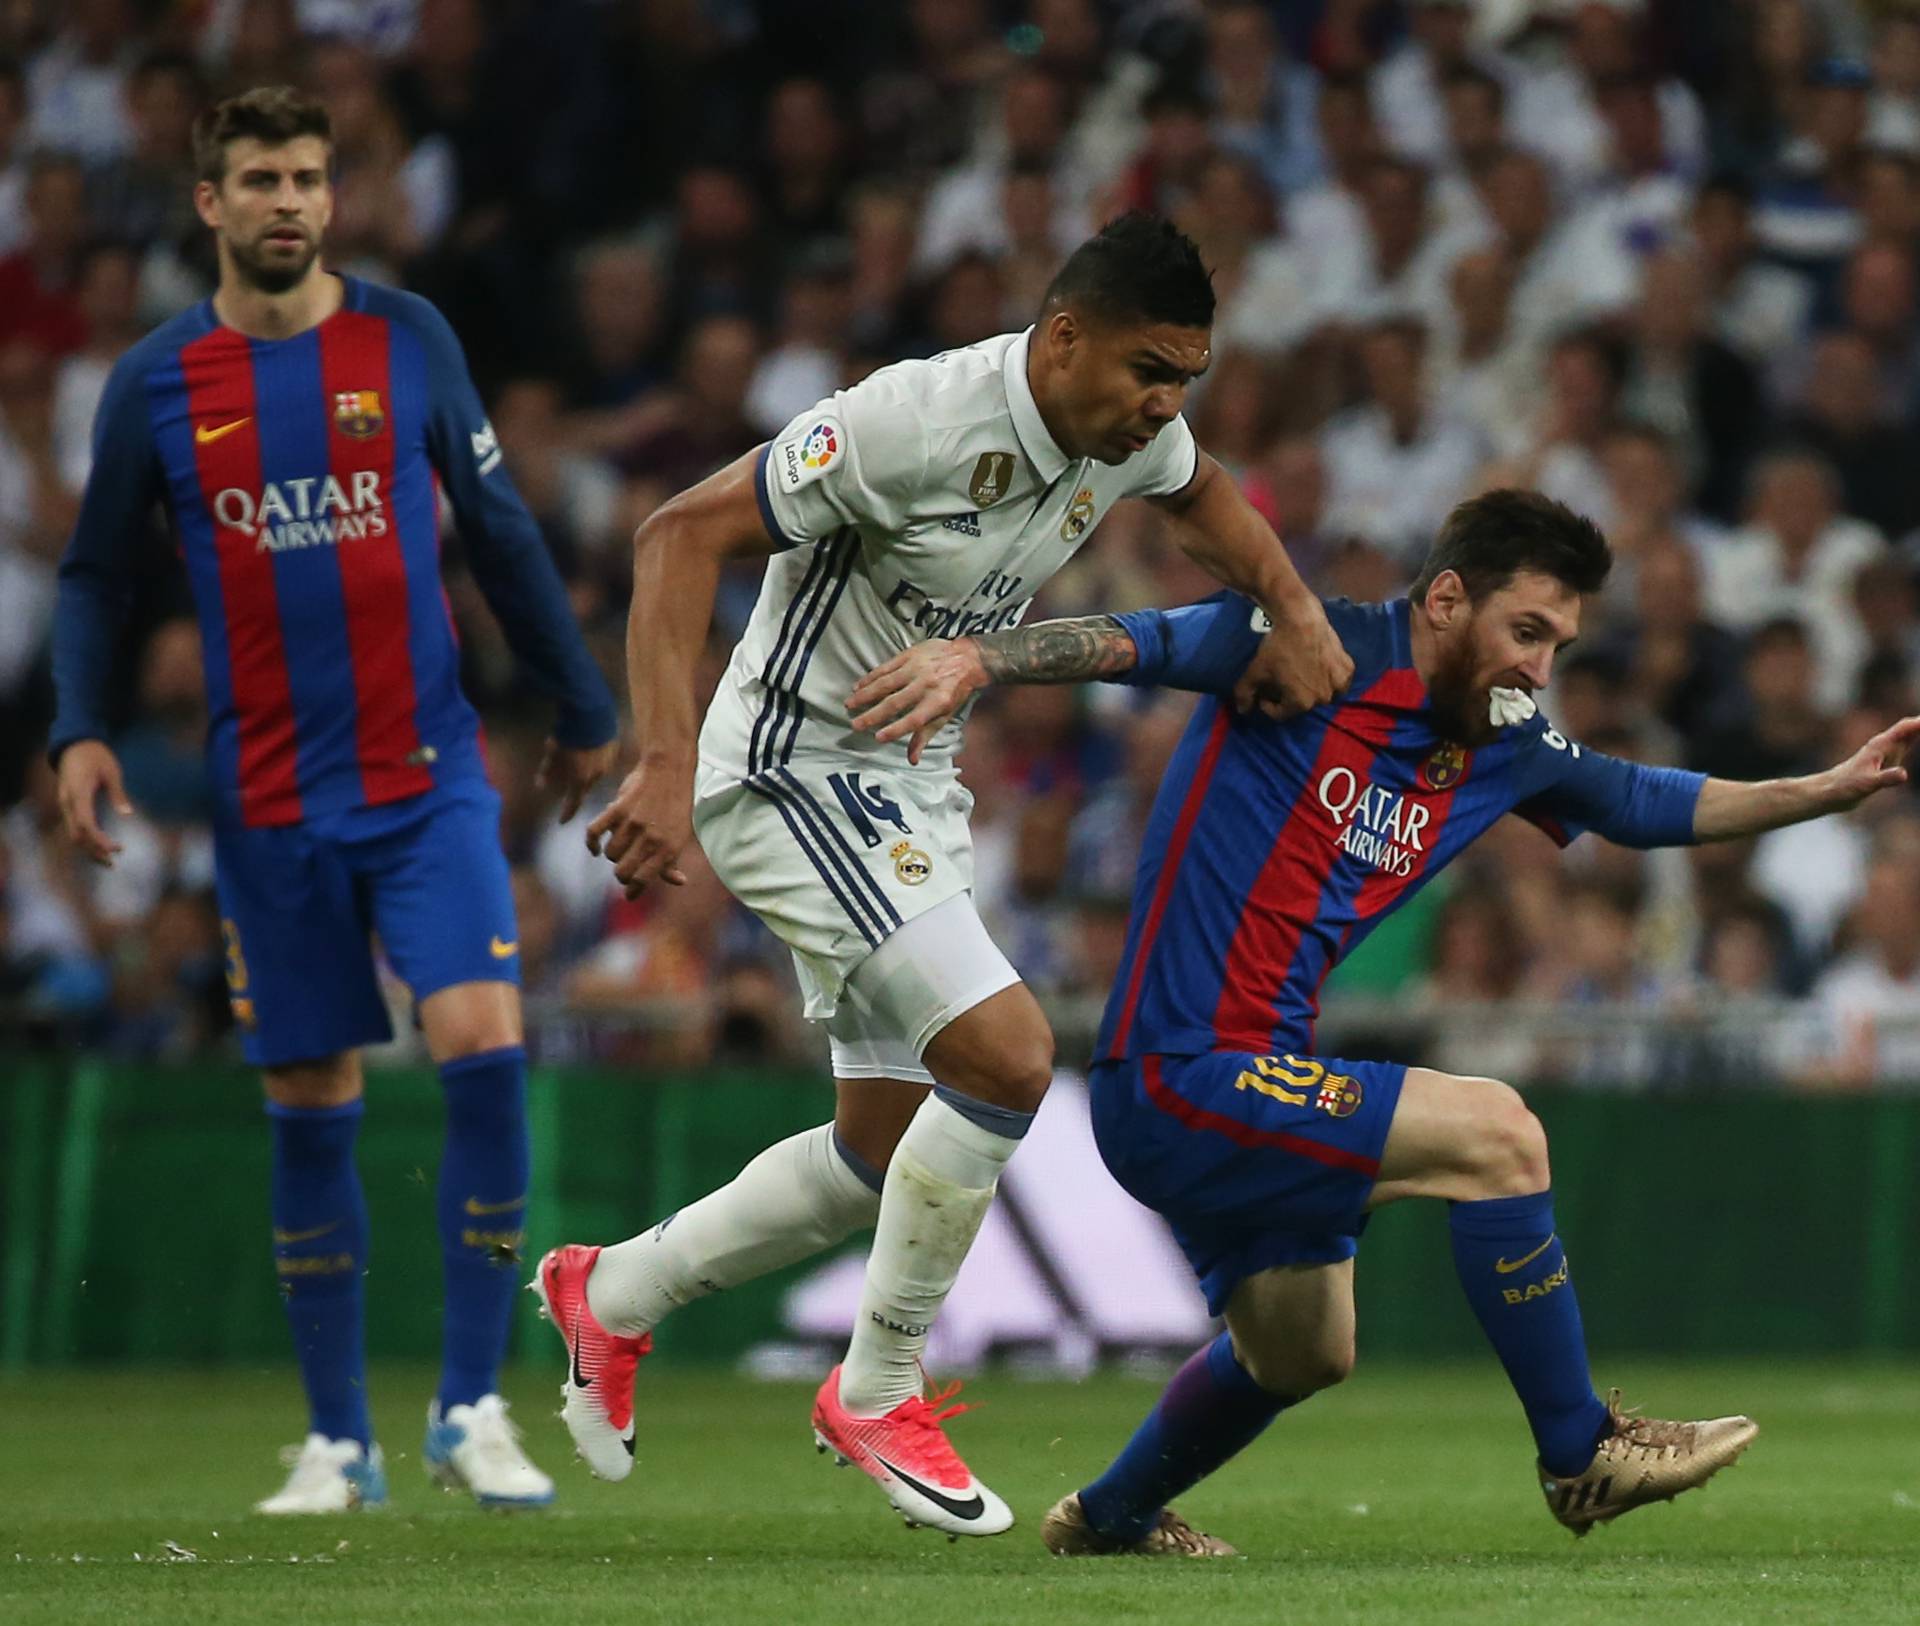 Barcelona's Lionel Messi in action with Real Madrid's Casemiro